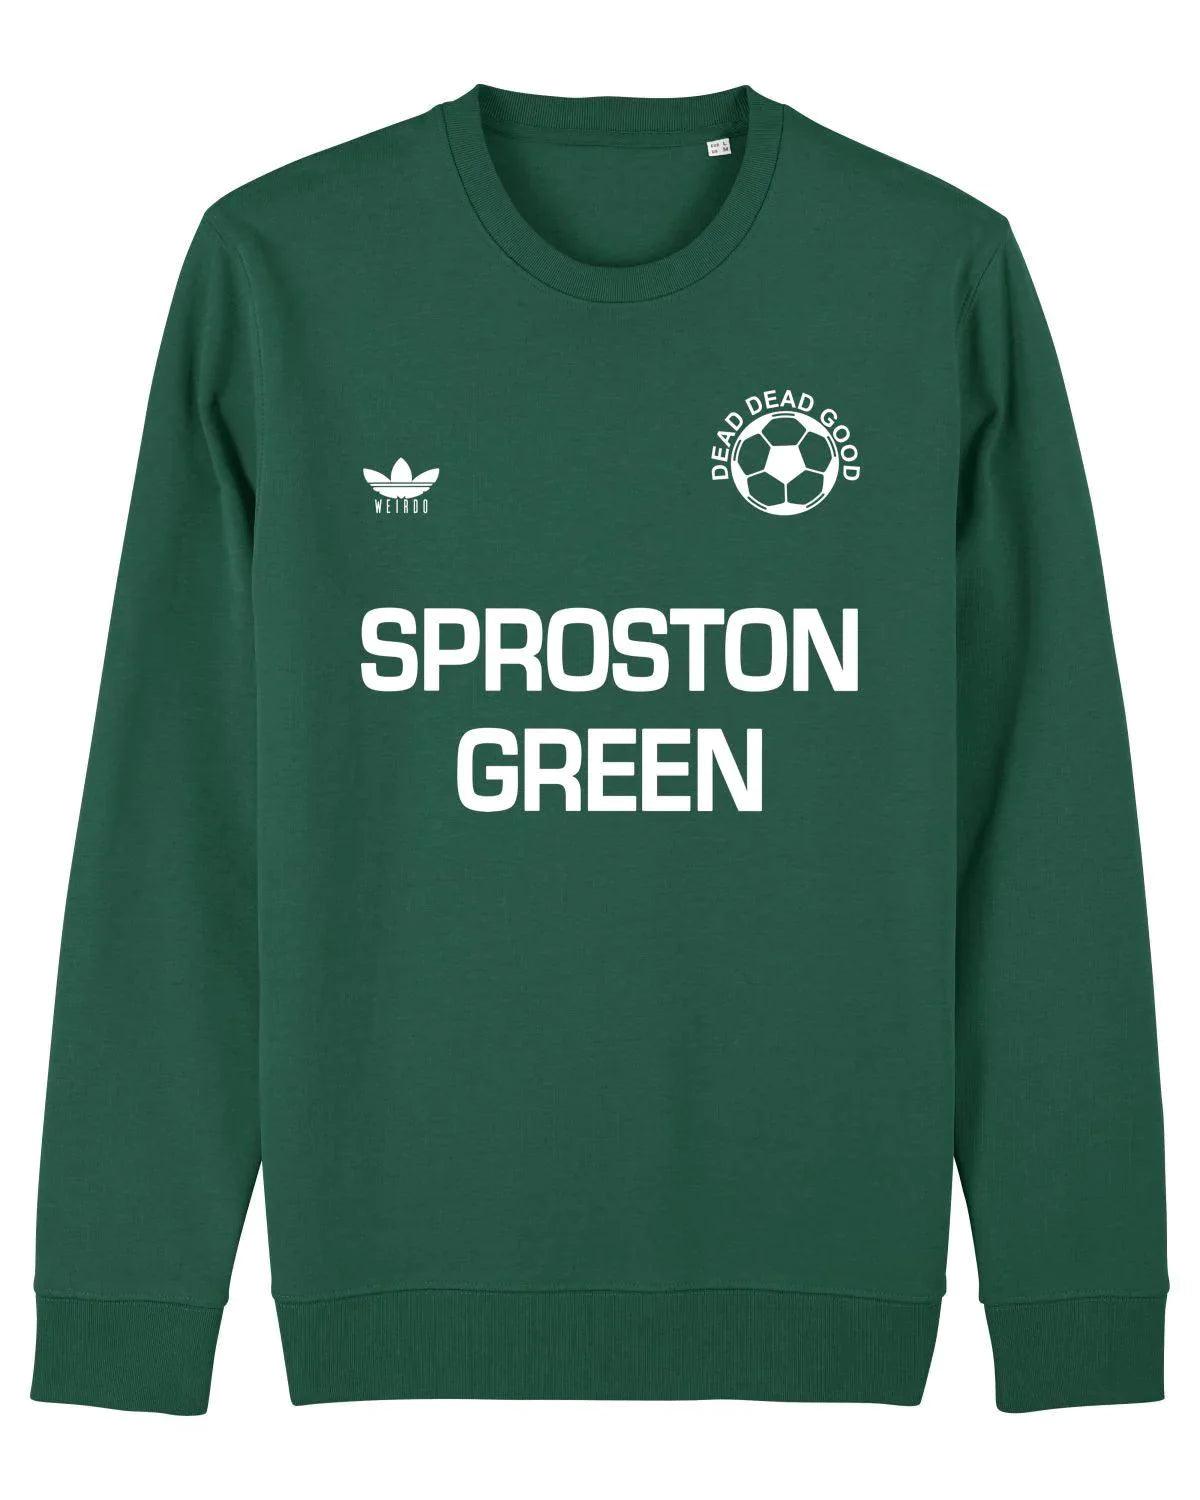 SPROSTON GREEN: Sweatshirt Inspired by The Charlatans & Football - SOUND IS COLOUR